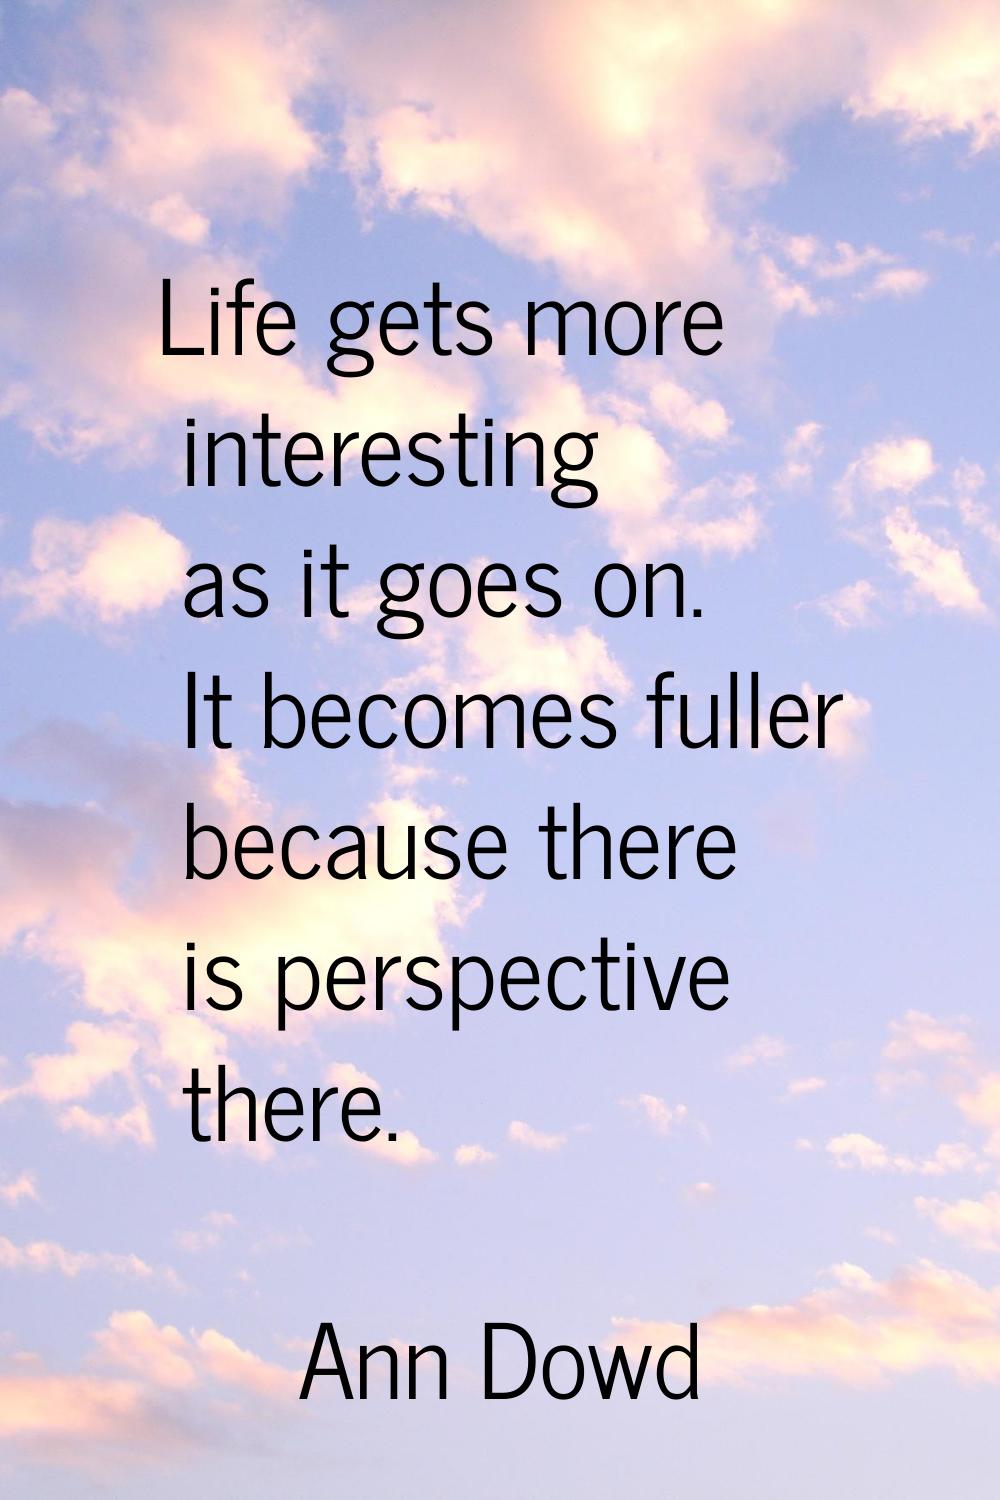 Life gets more interesting as it goes on. It becomes fuller because there is perspective there.